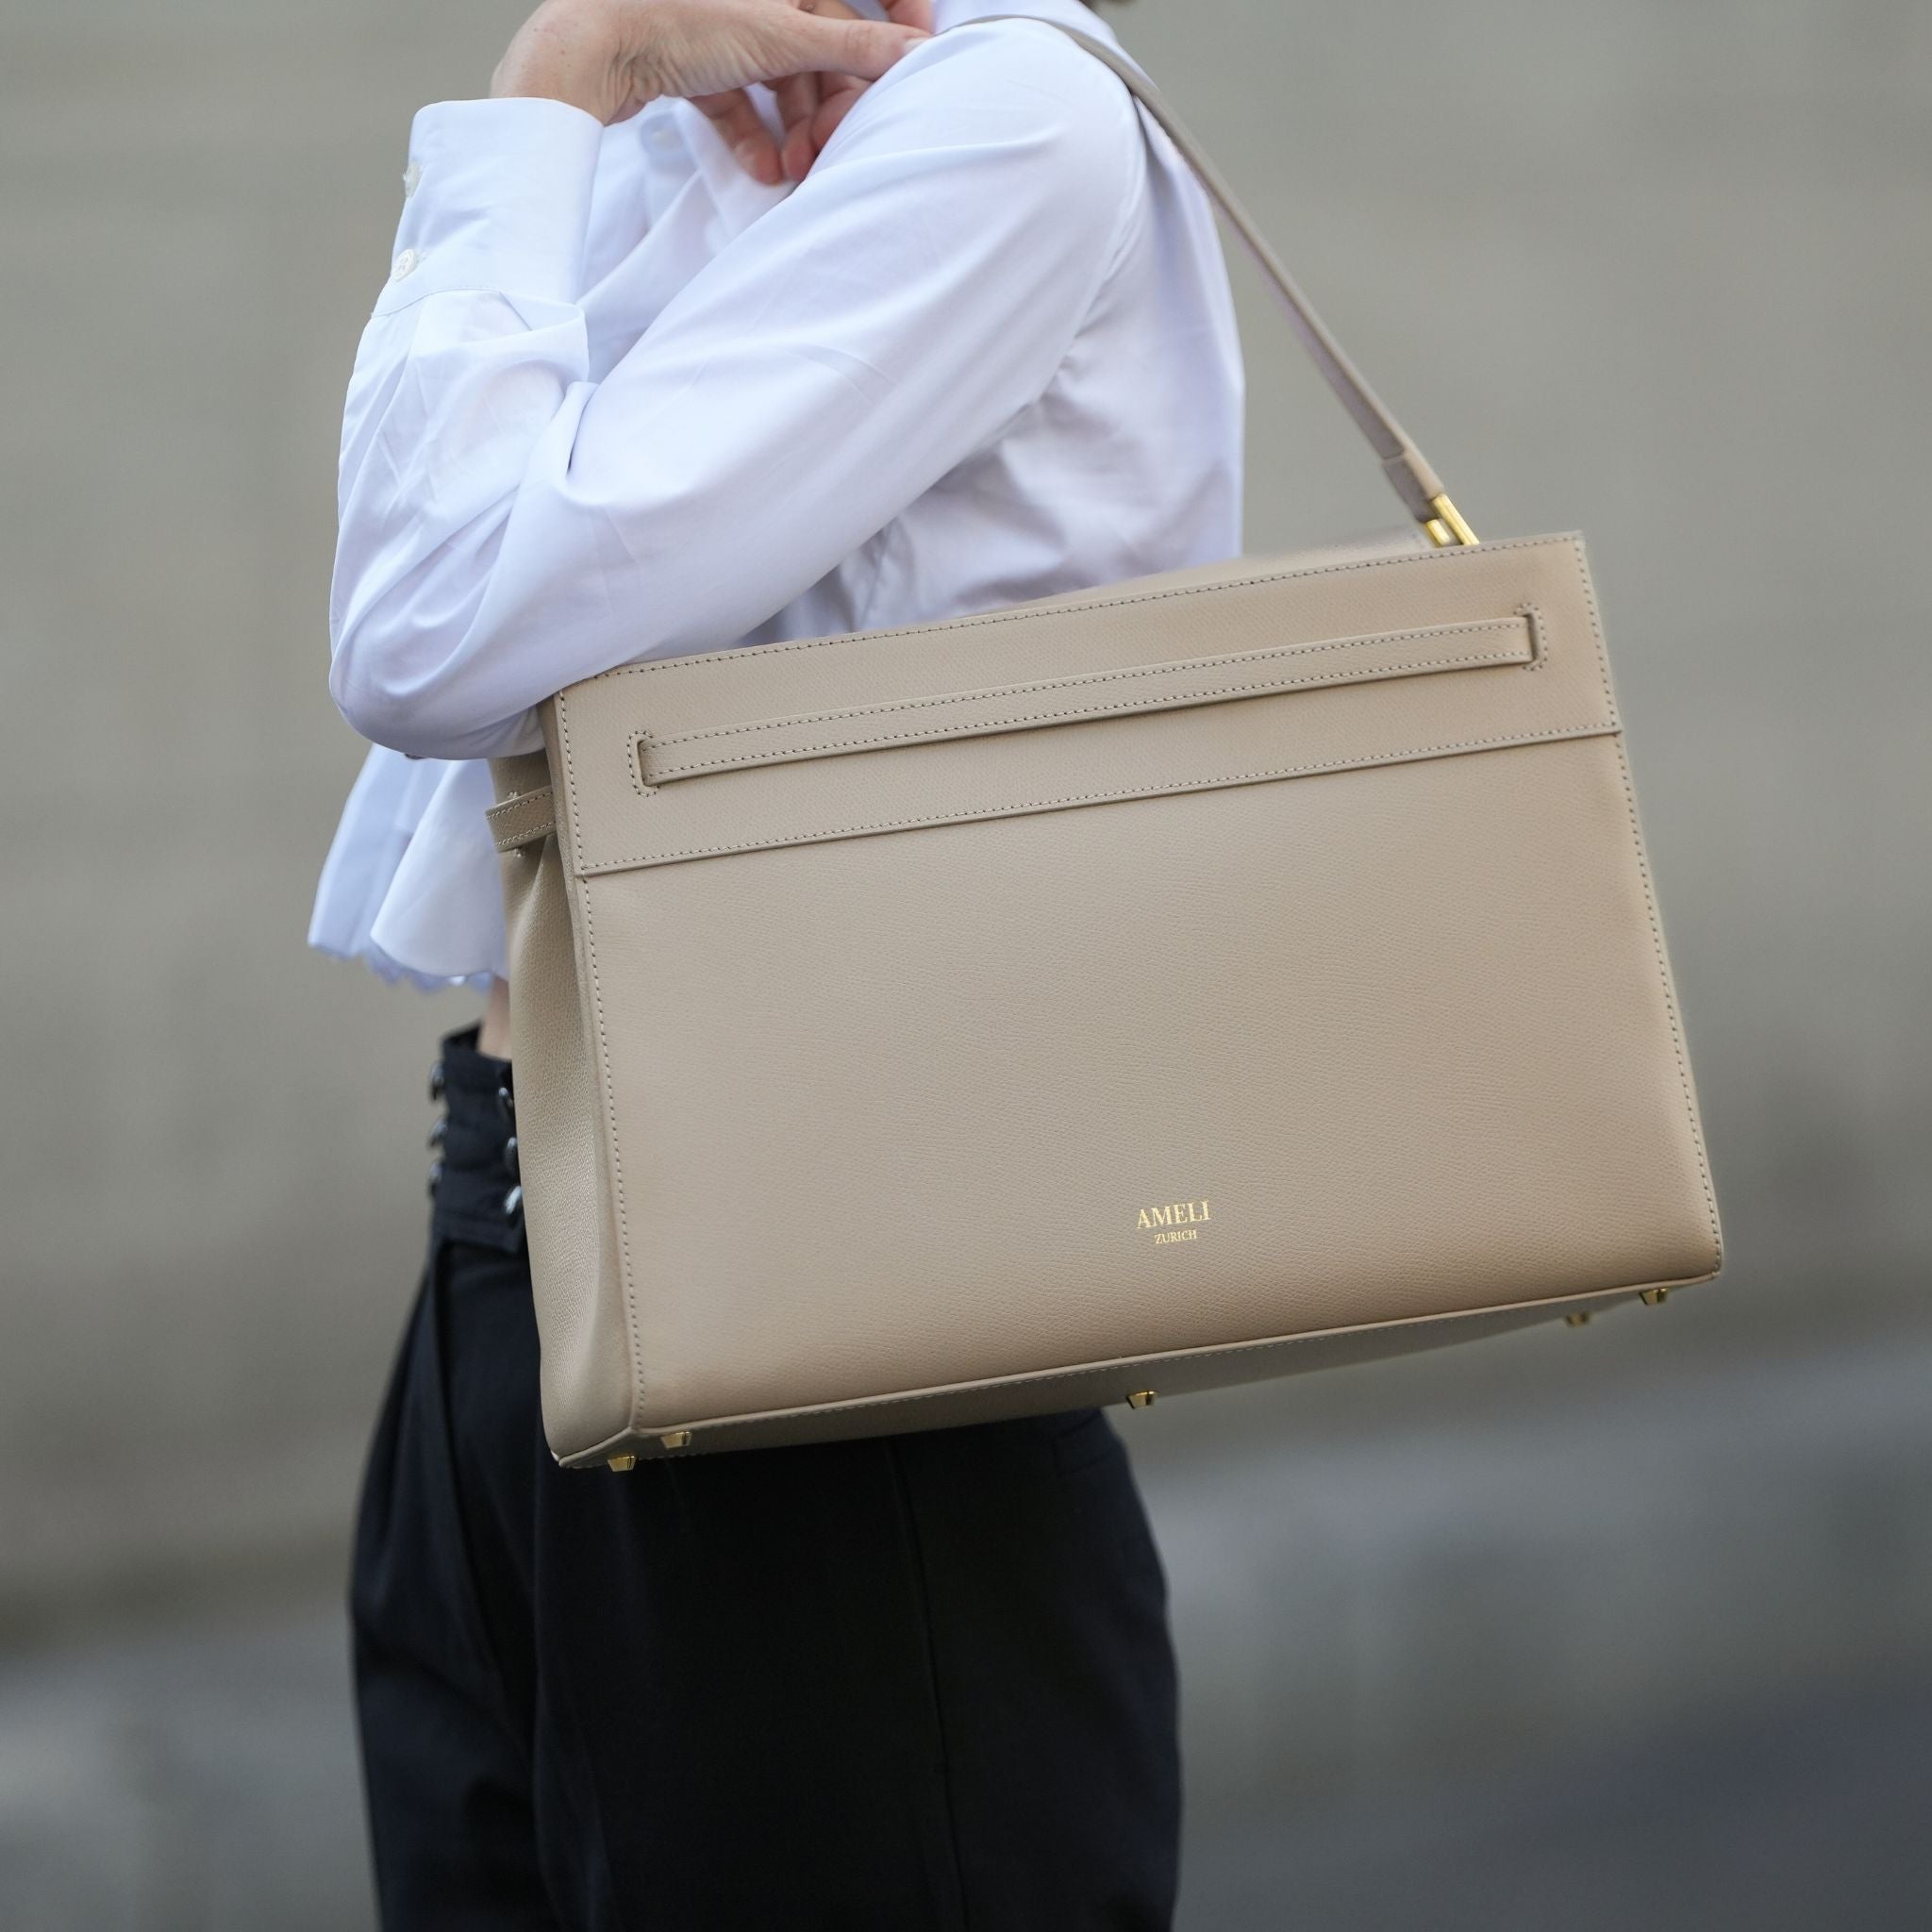 AMELI Zurich | SEEFELD | Cappuccino | Pebbled Leather | Shoulder bag